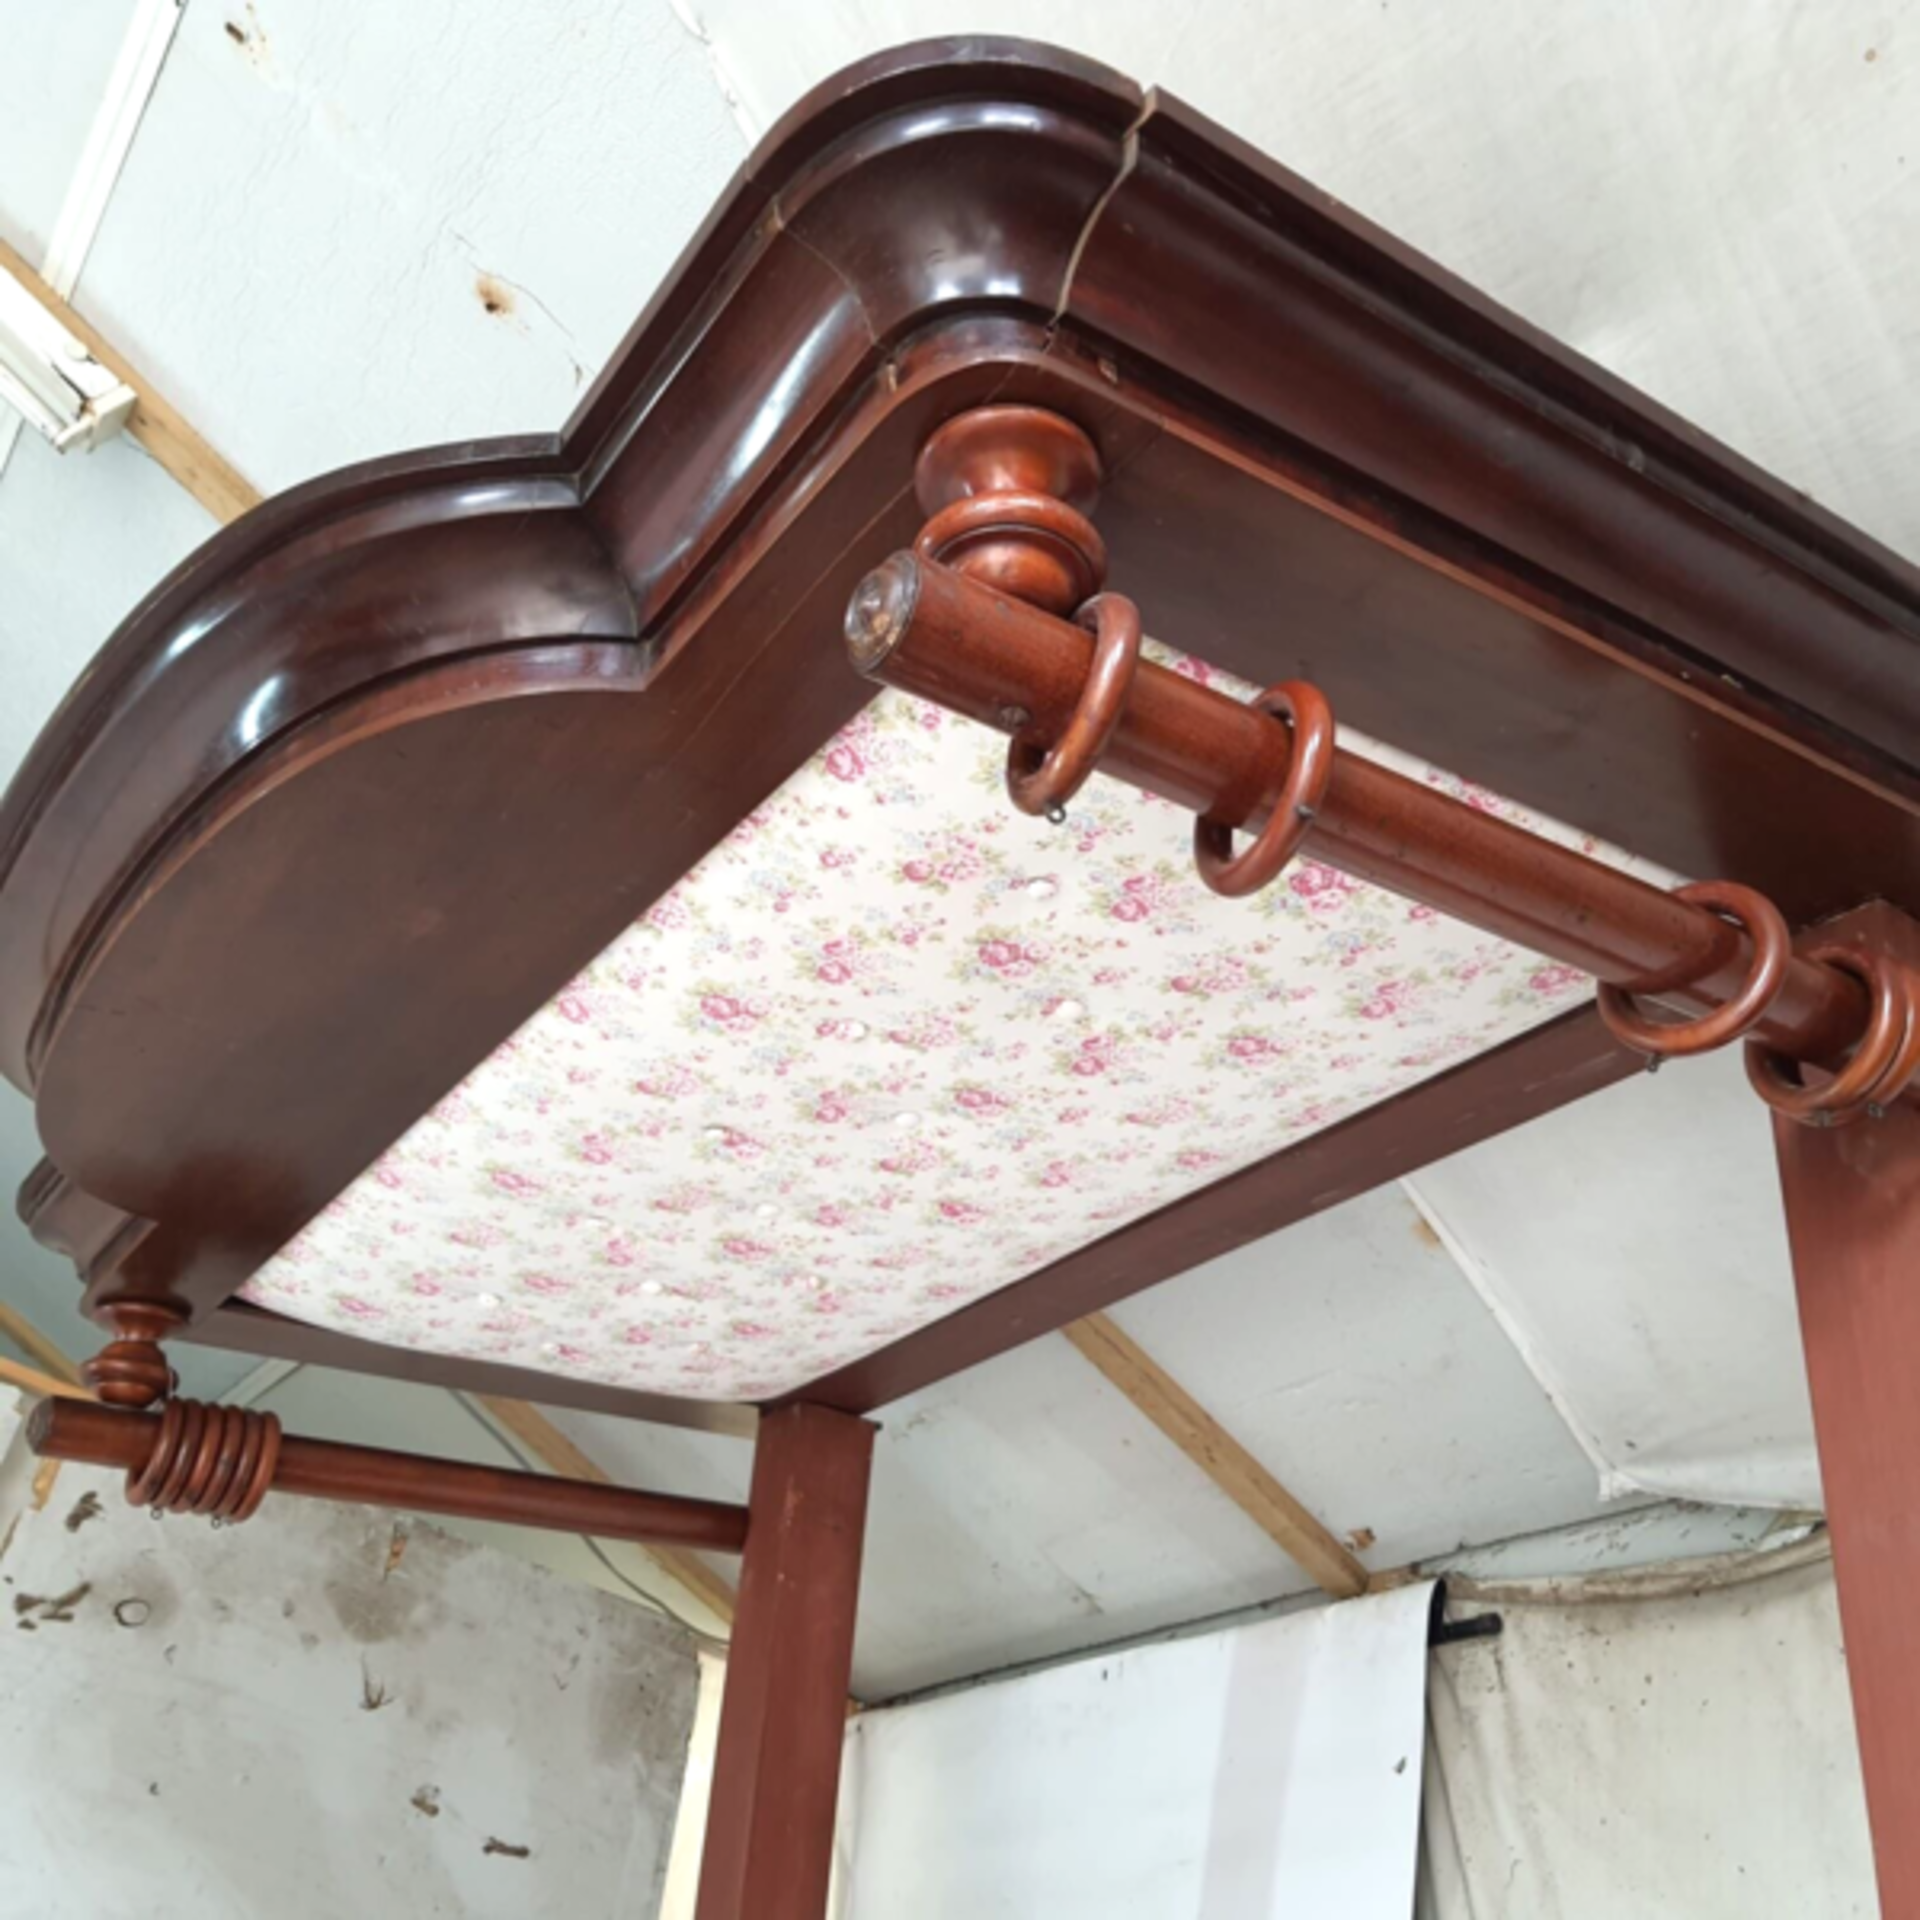 Victorian Mahogany 4ft6” Half Tester Bed The Bed Dates From Around 1860 It Has A Quarter Canopy Over - Bild 7 aus 13